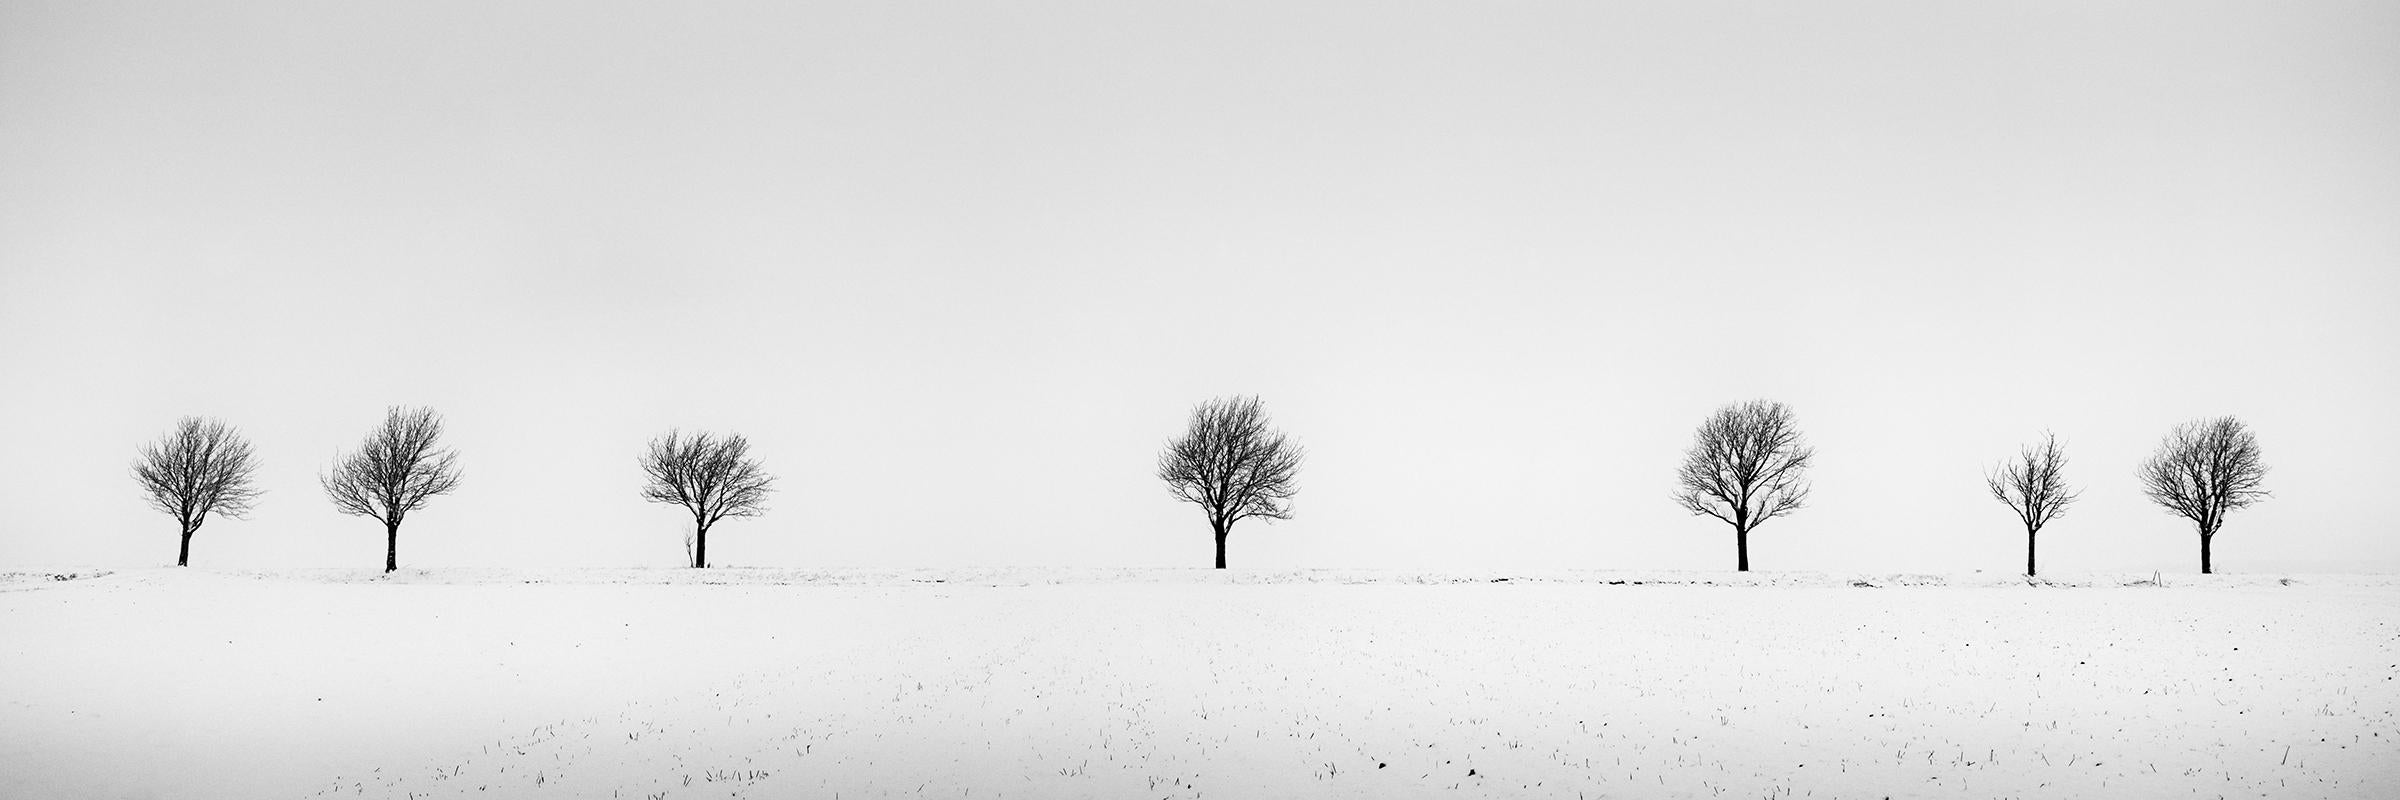 Cherry Trees in Snow Field, Panorama, black and white photography, landscape